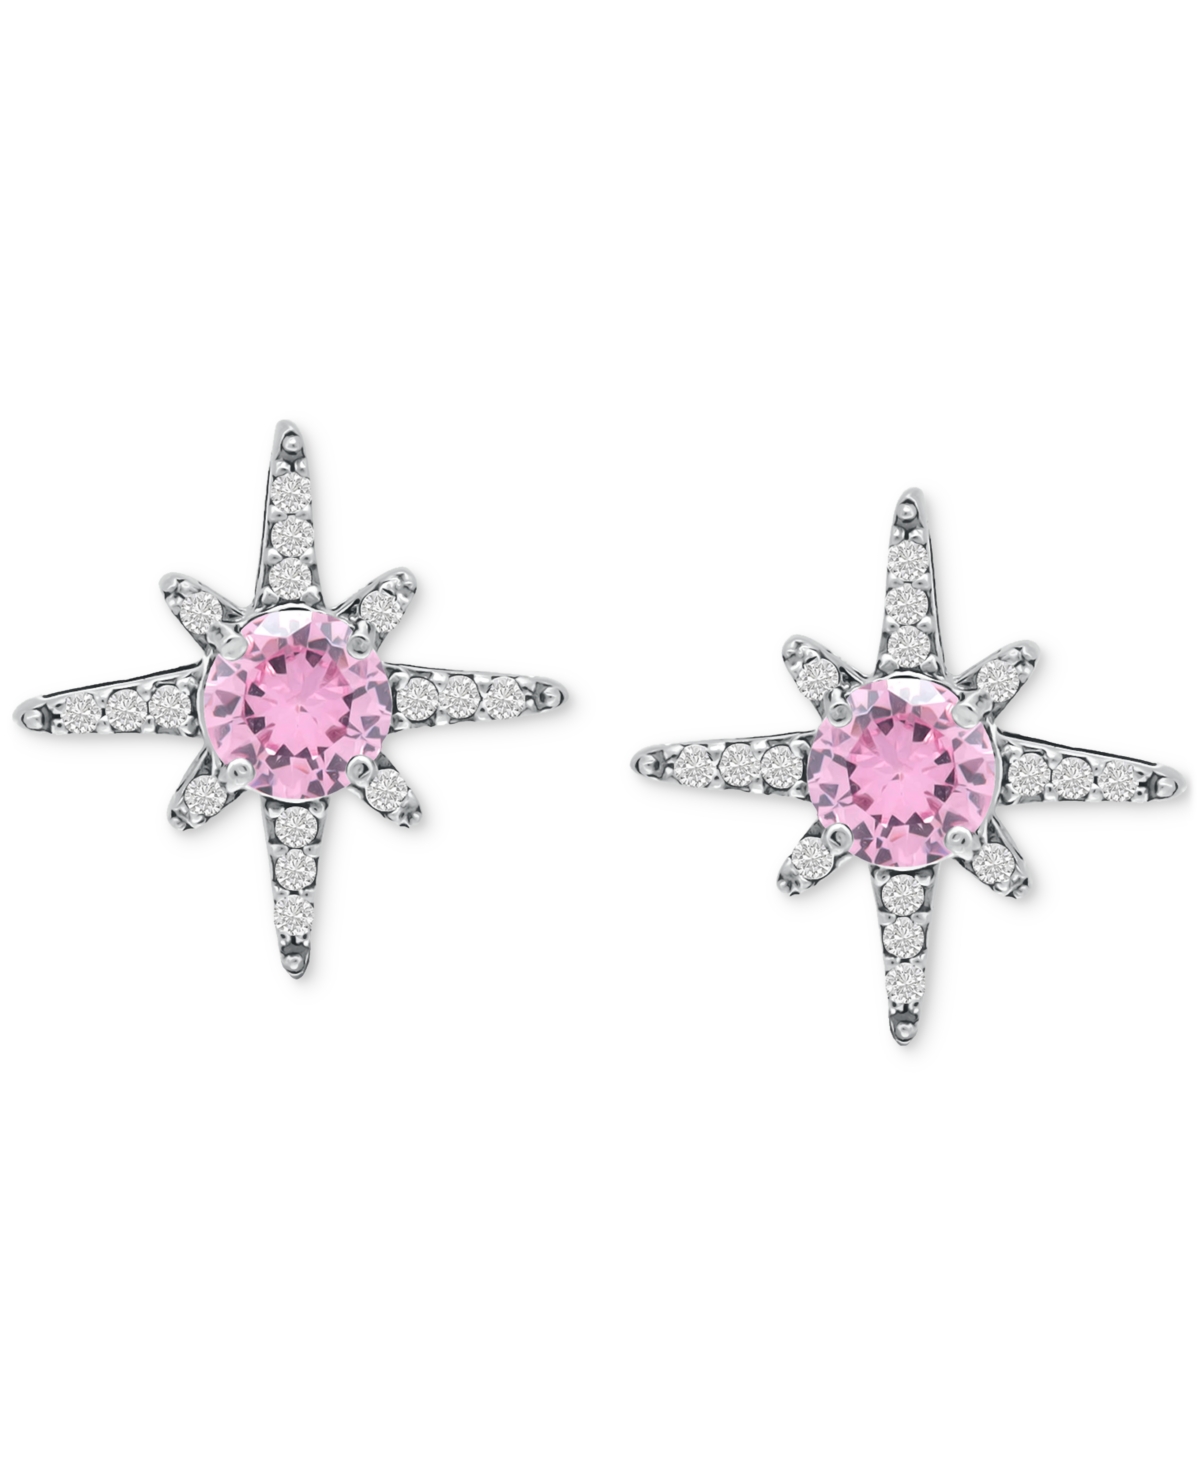 Cubic Zirconia Celestial Star Stud Earrings in Sterling Silver, Created for Macy's - Pink